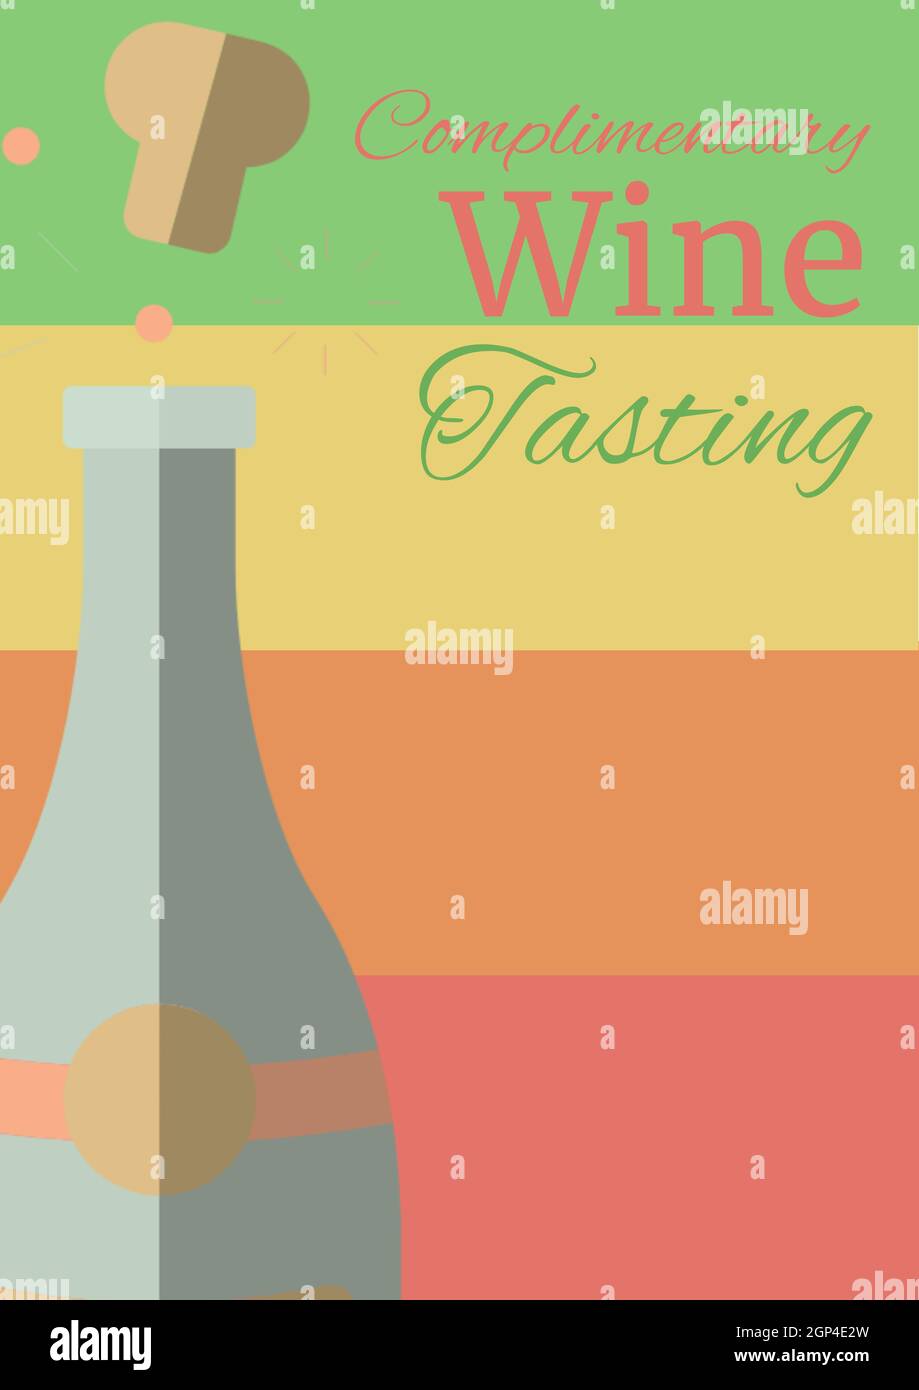 Composition of complimentary wine tasting text and wine bottle icon on colorful background Stock Photo